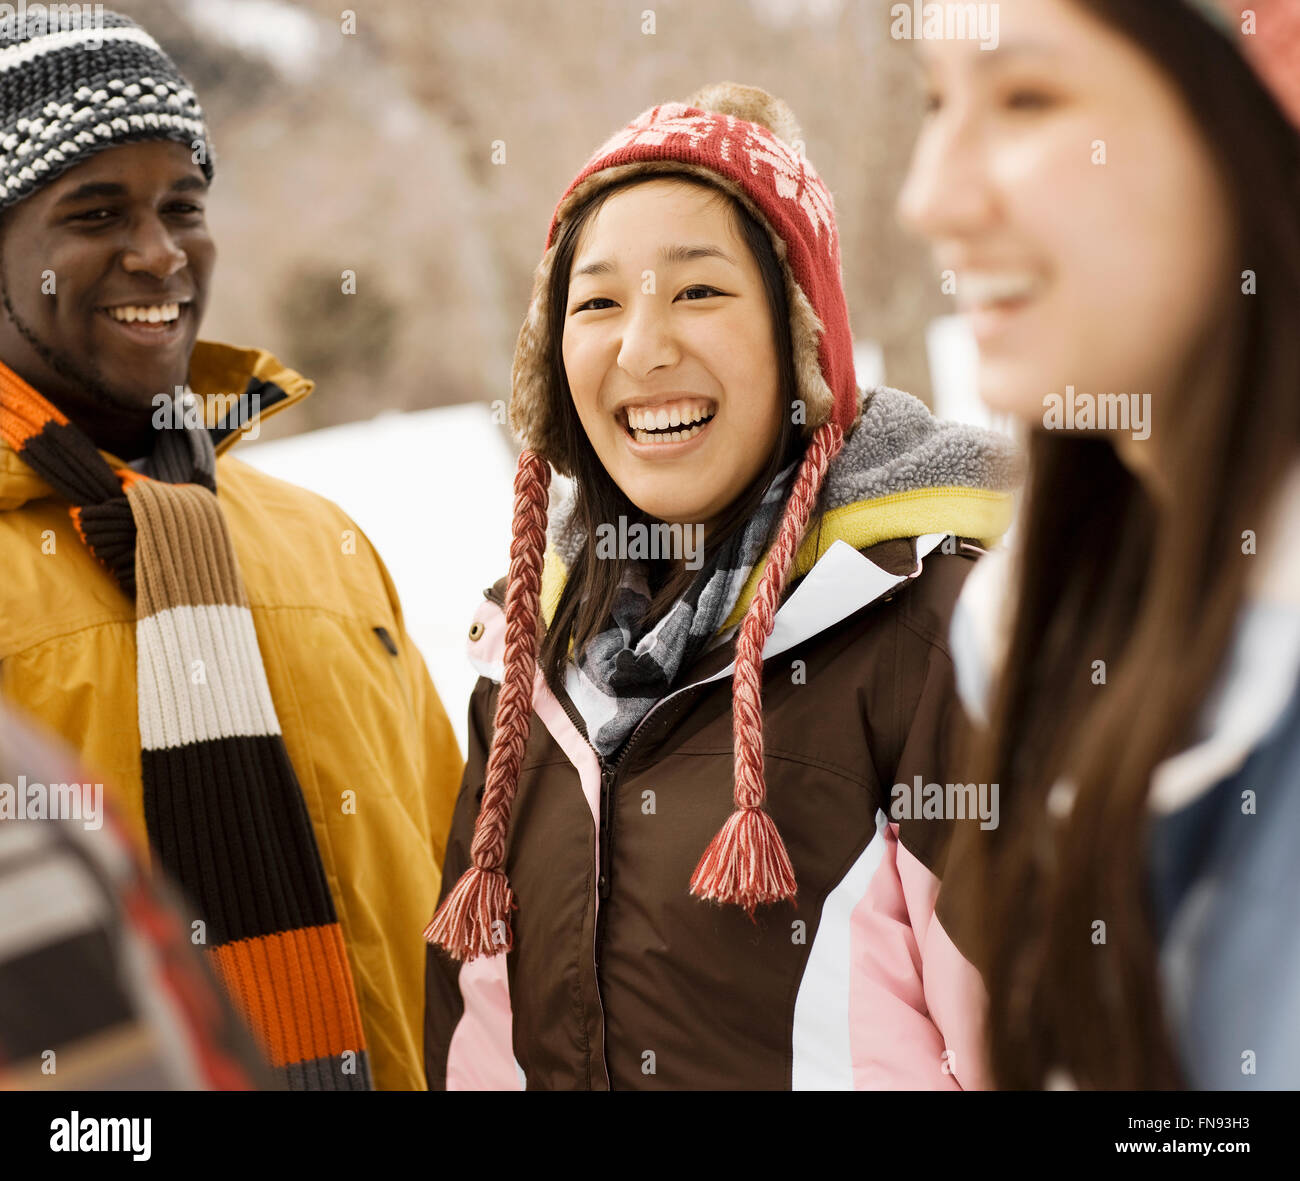 Three young people, two women and a man in hats and scarves. Stock Photo